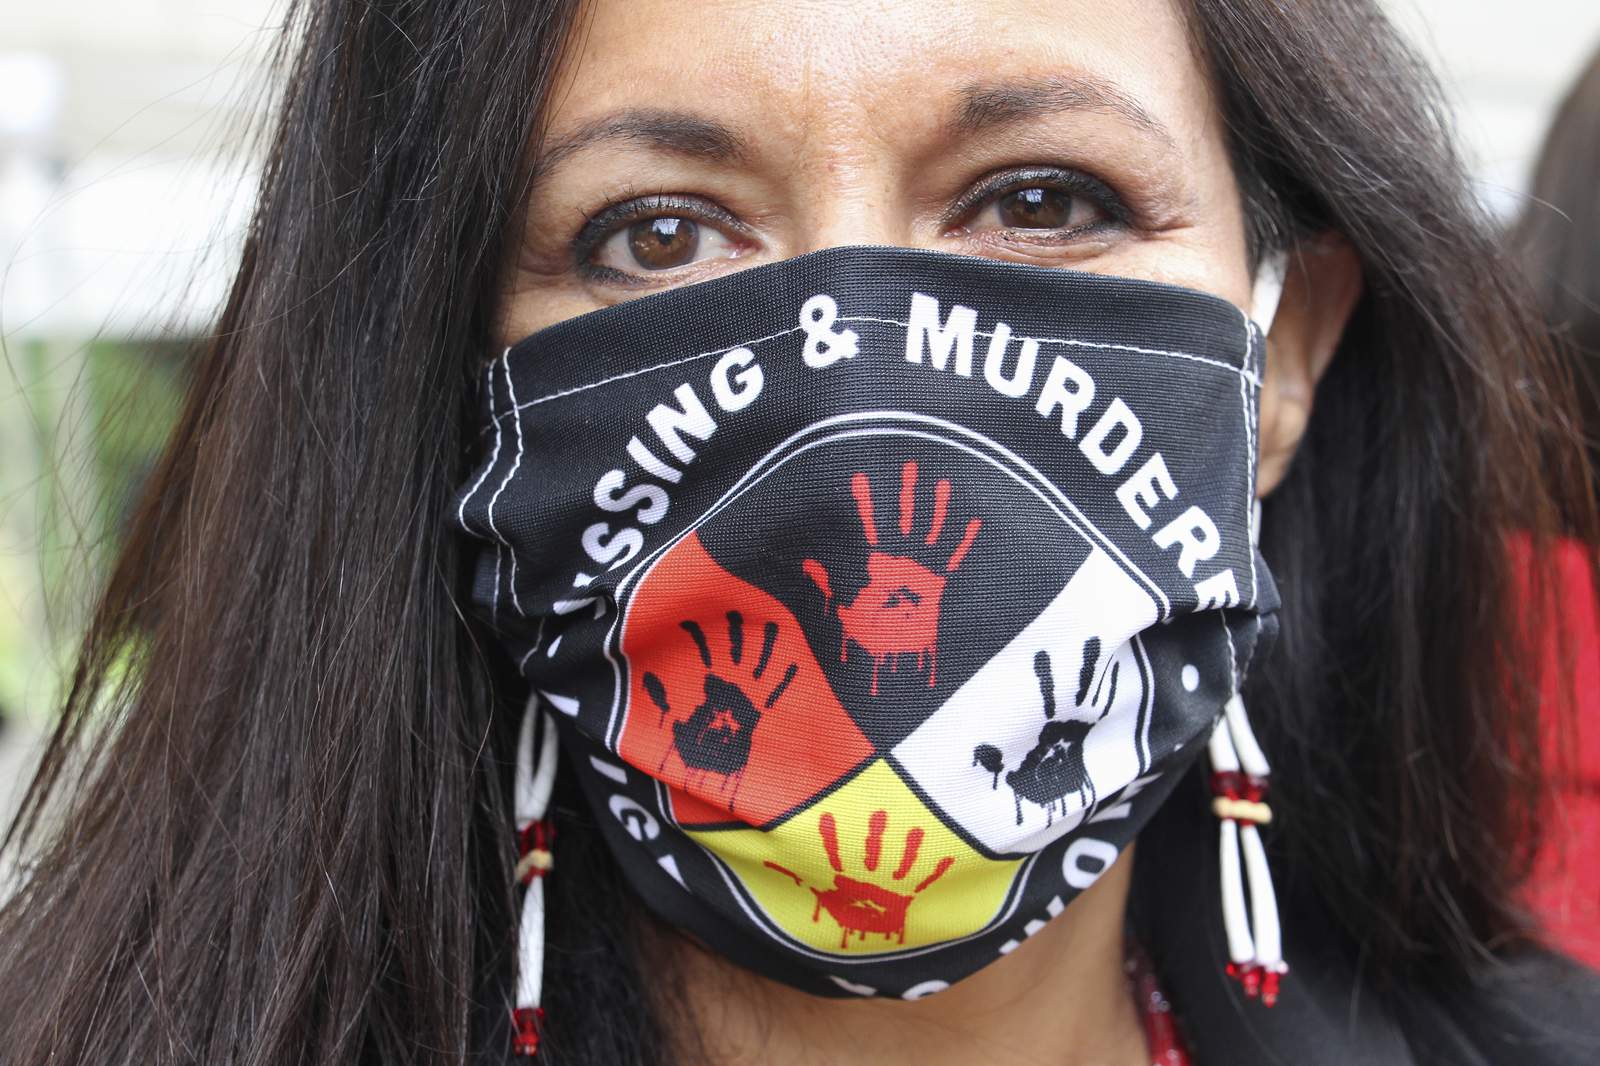 Cold case units focus on missing, murdered Indigenous women